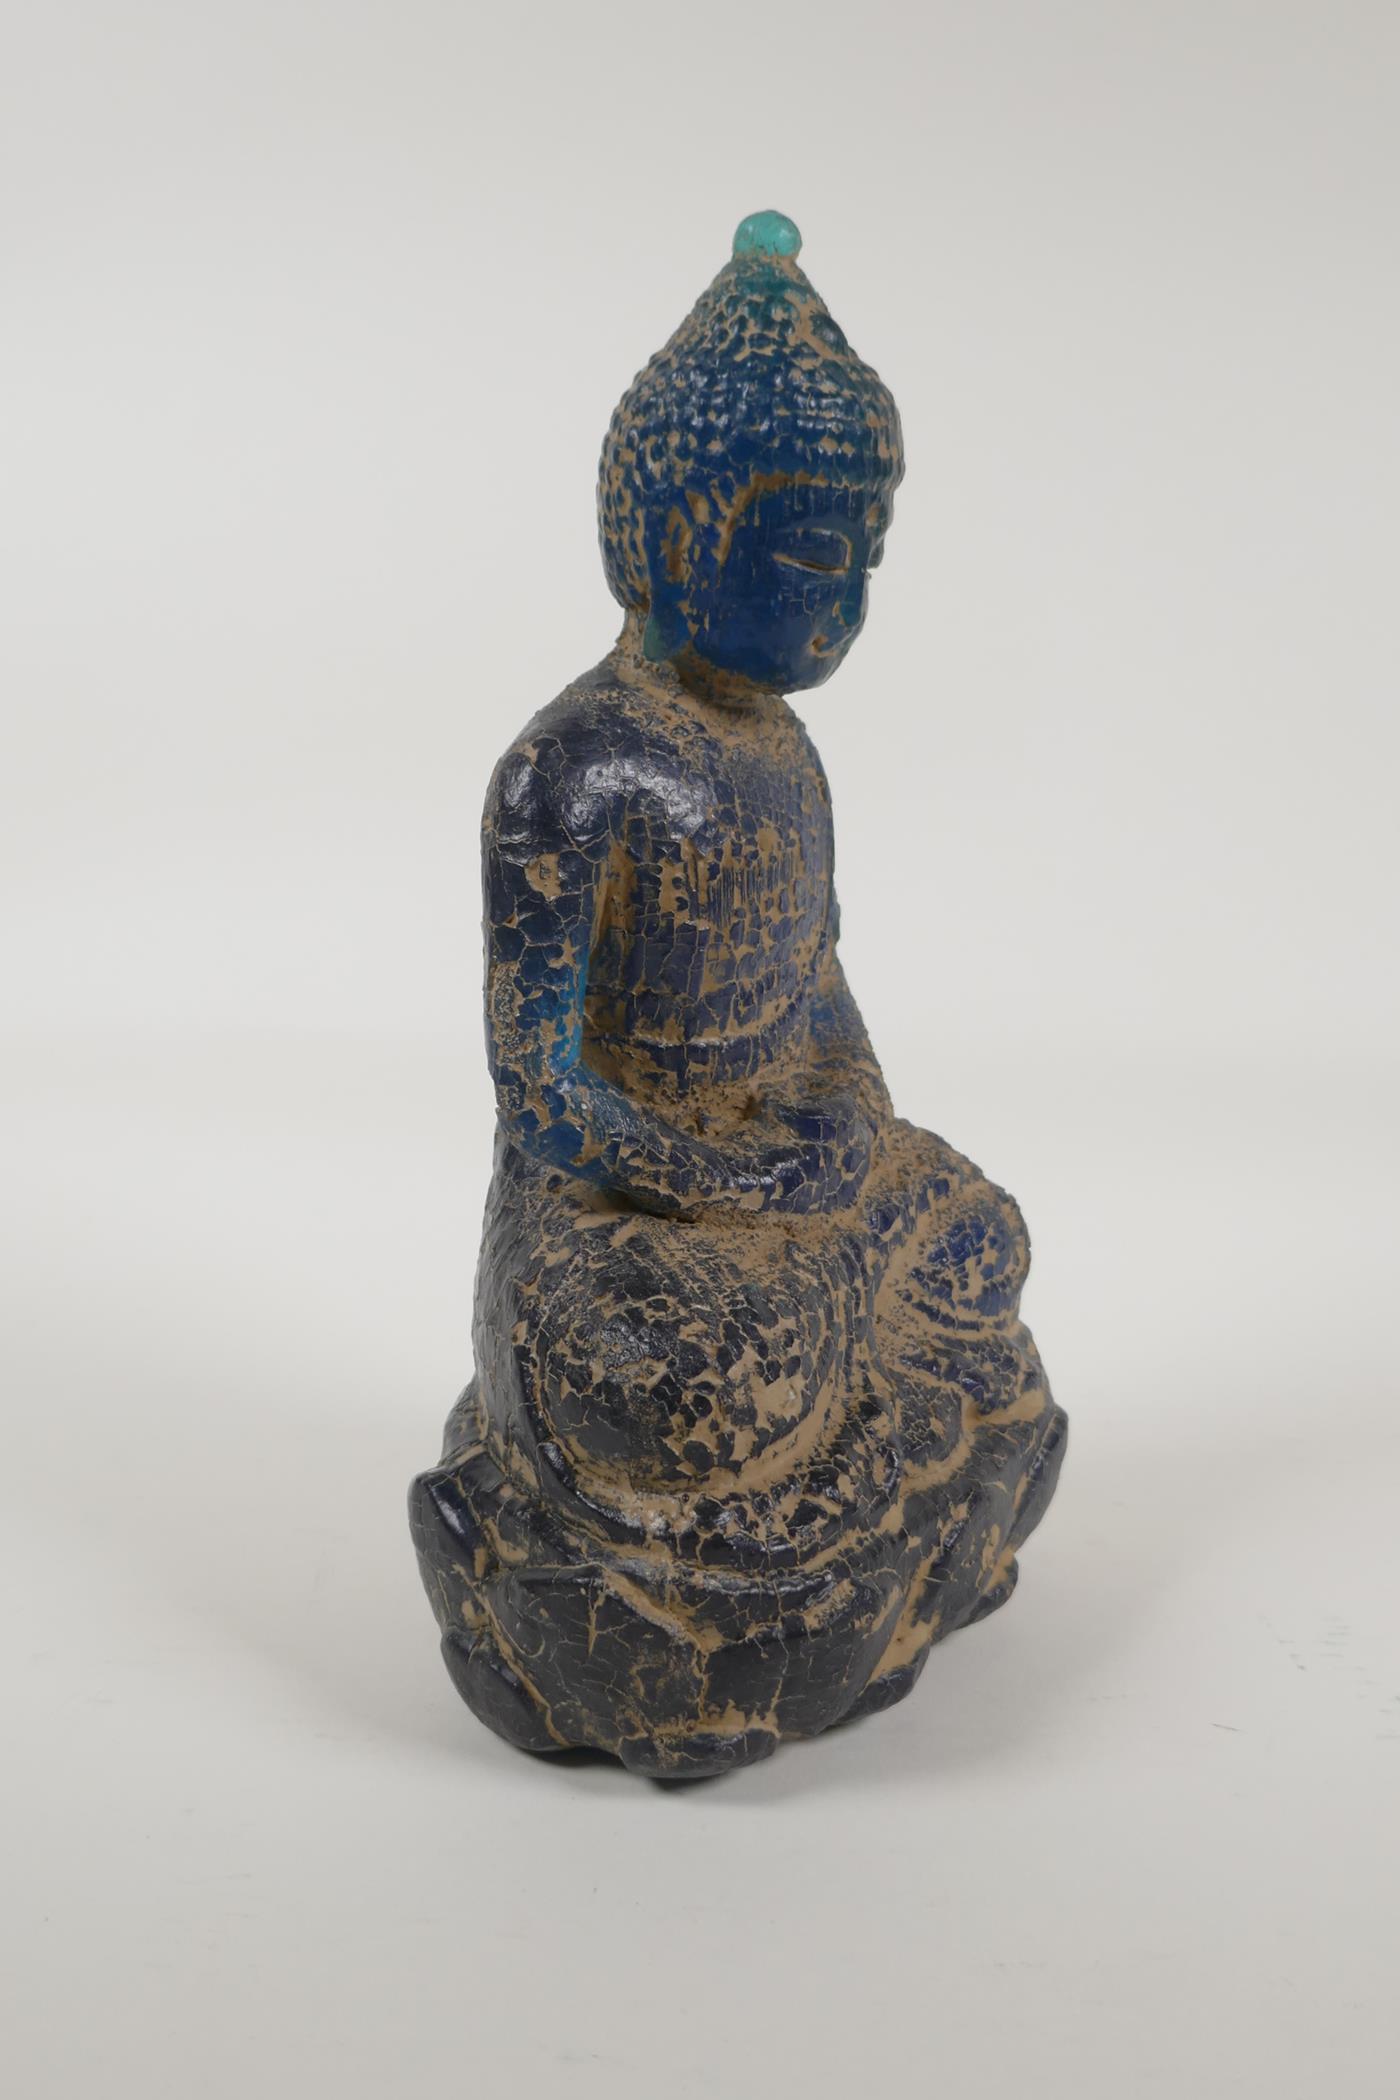 A Chinese archaic style blue composition figure of buddha with a distressed finish, 10" high - Image 2 of 3